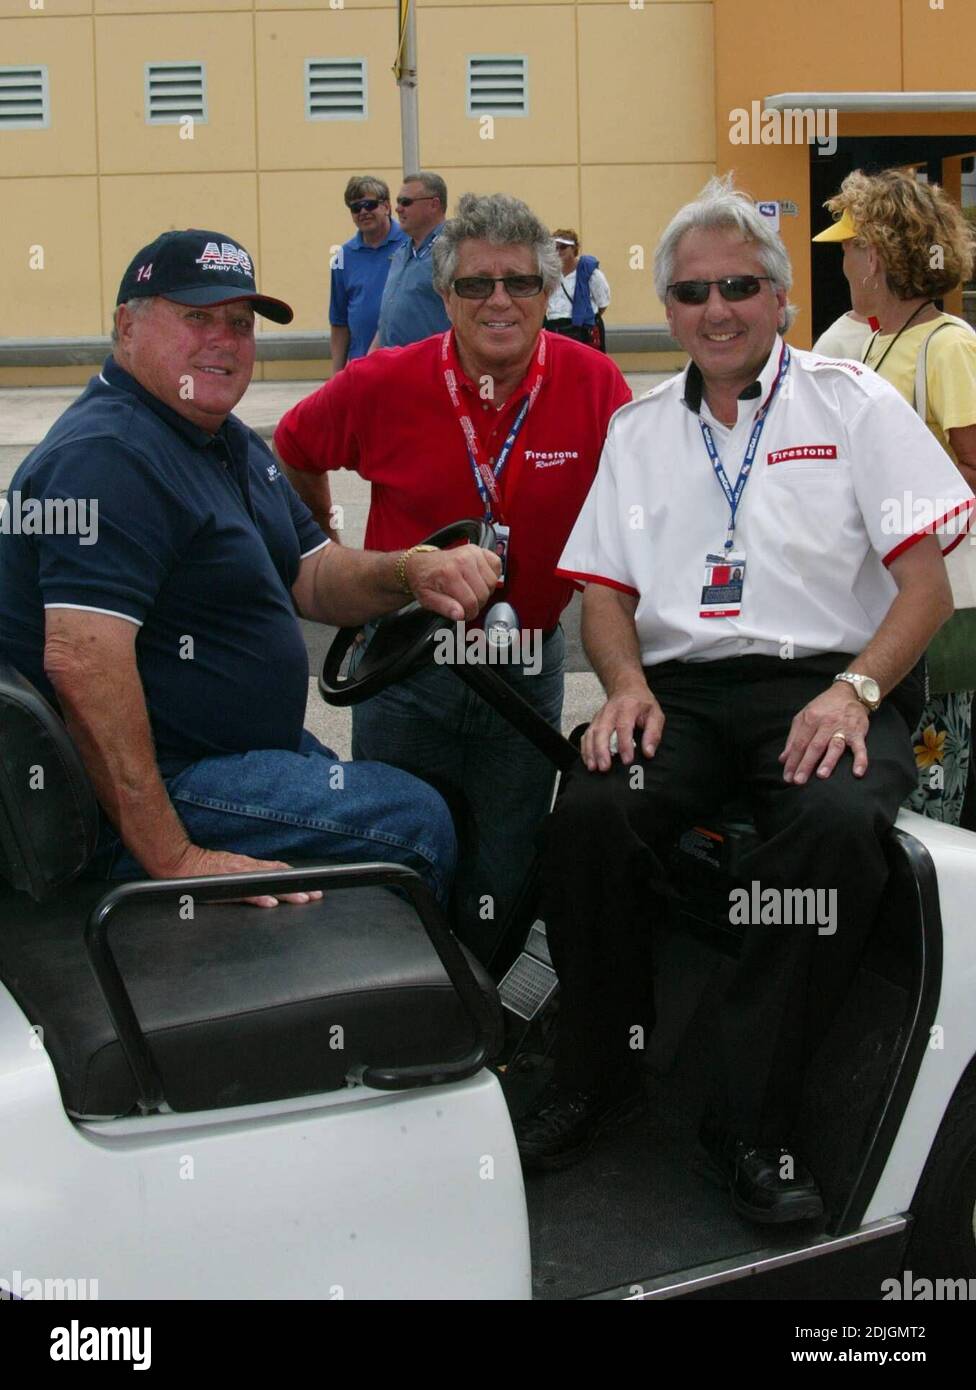 AJ Foyt and Mario Andretti at Toyota Indy 300 weekend at Homestead Miami Speedway. Indy Pro Series Qualifying. 03/24/06 Stock Photo